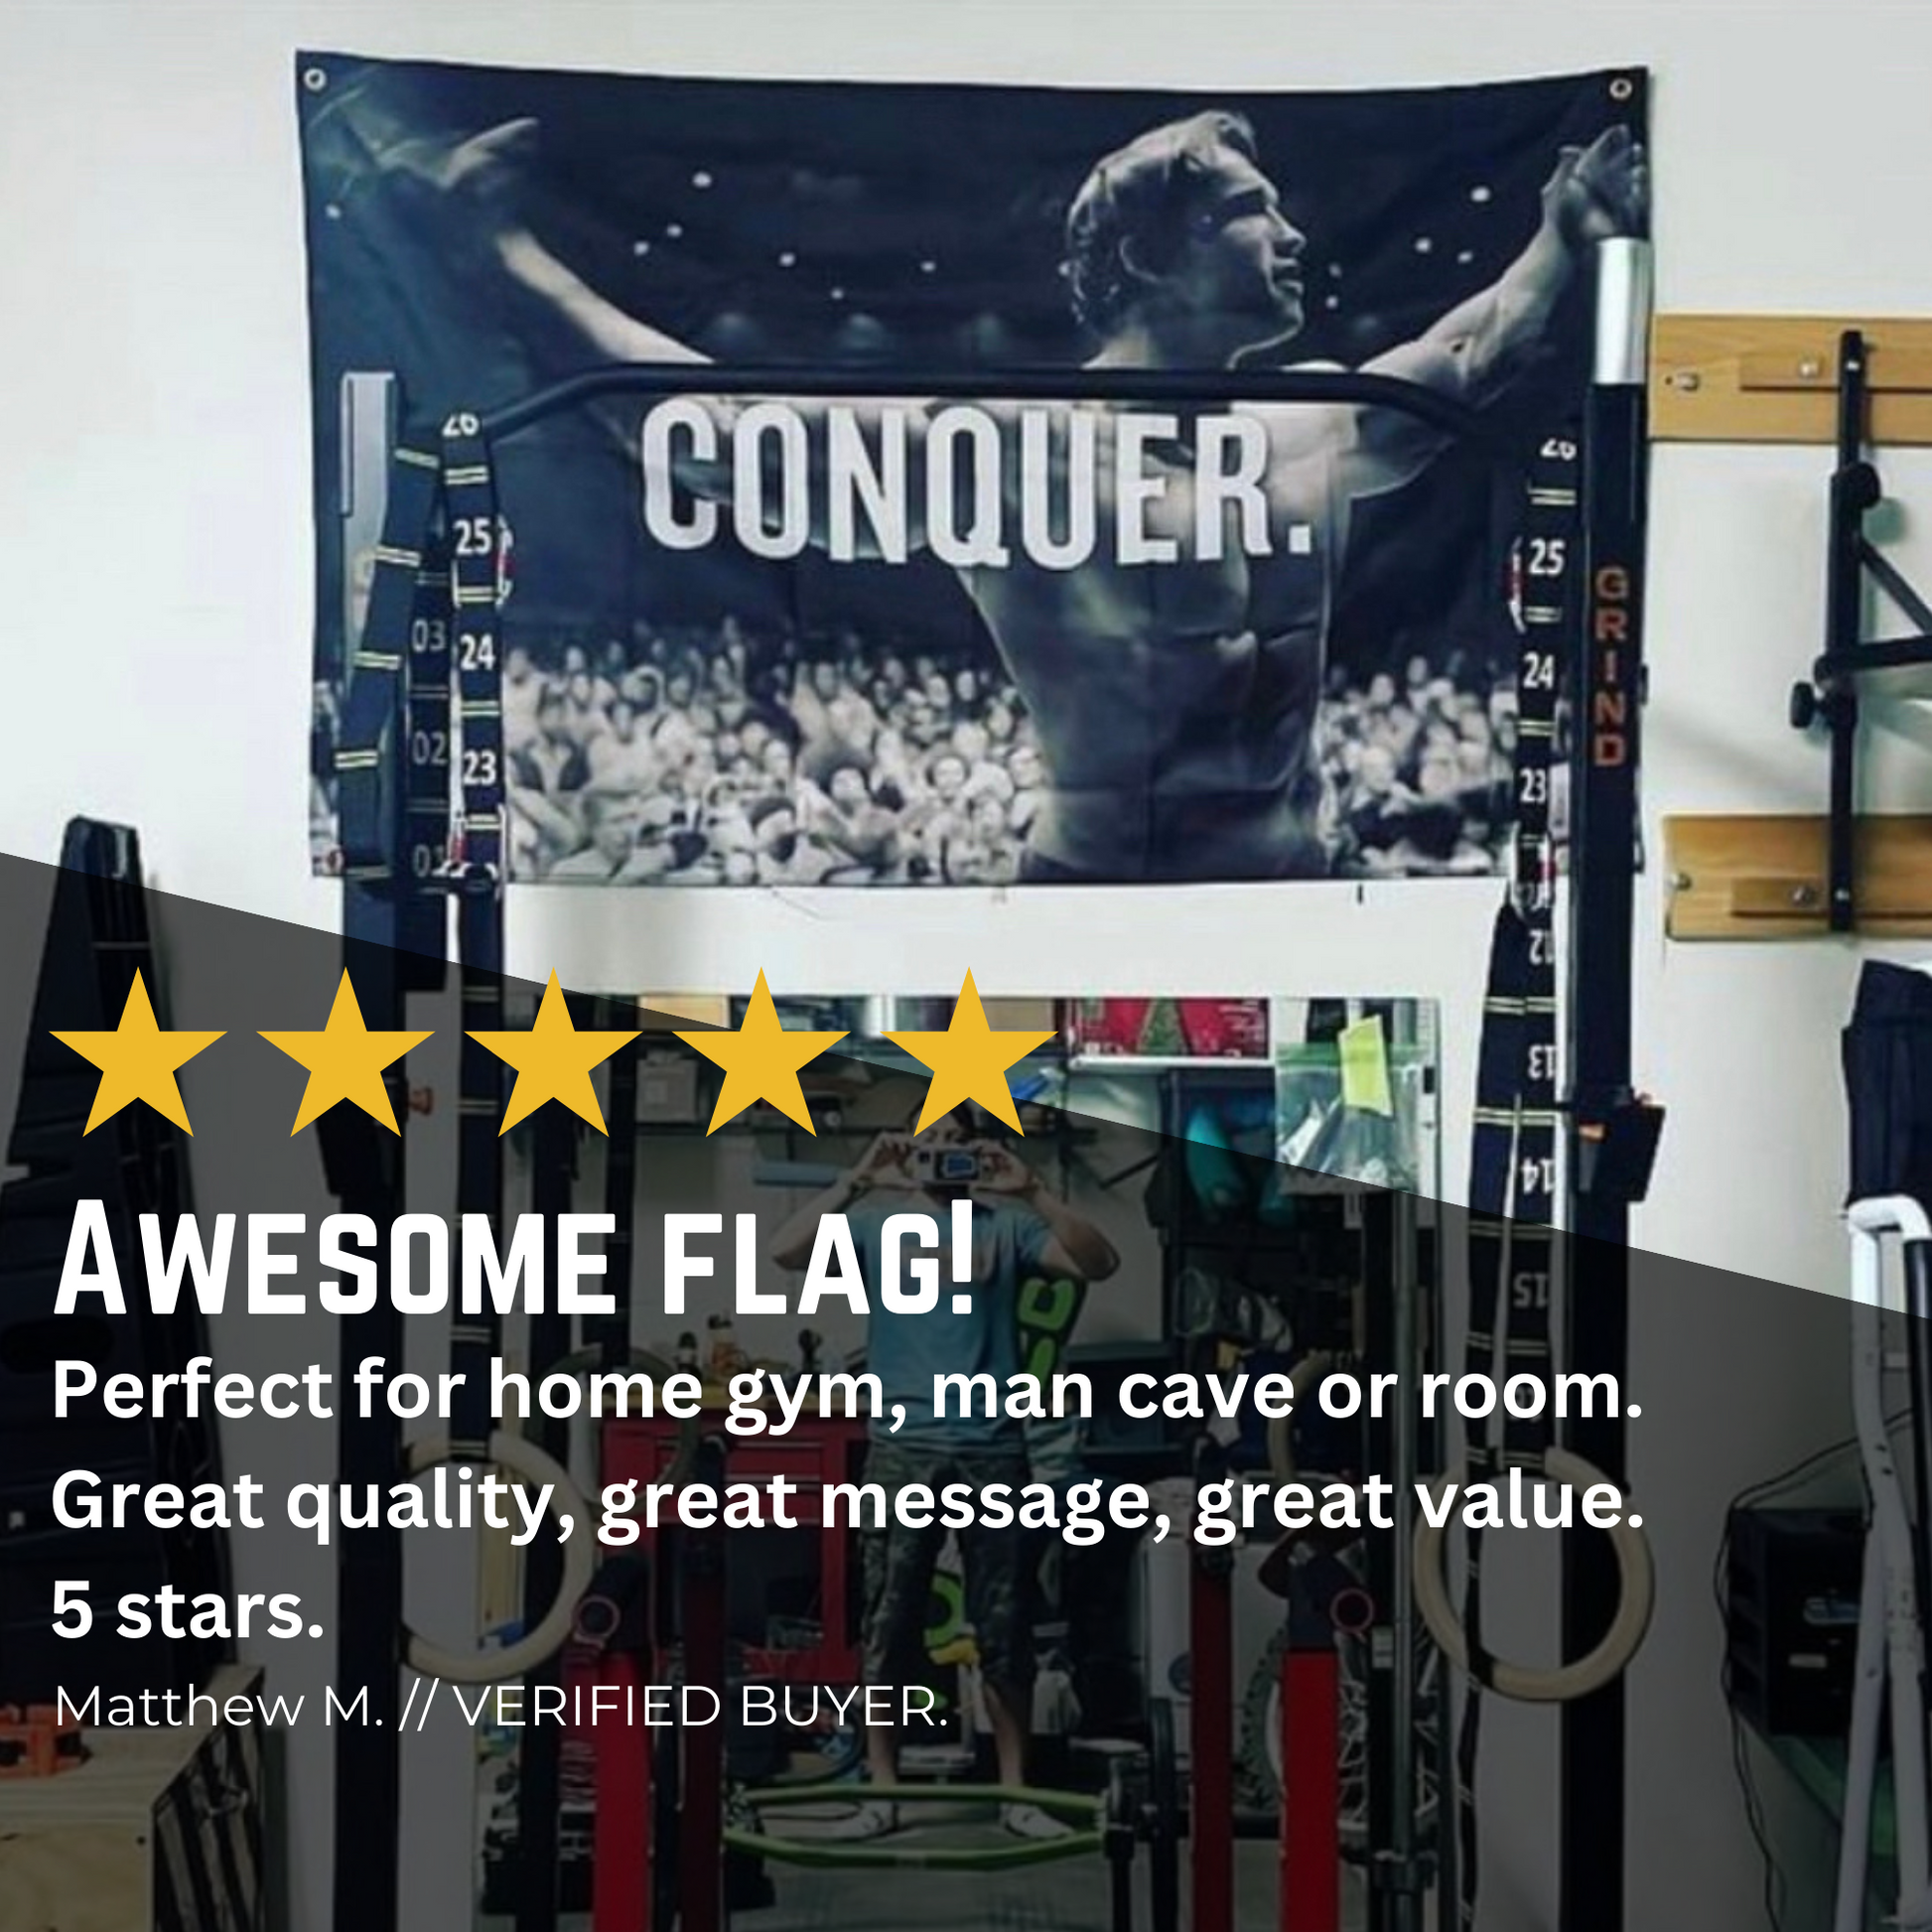 Elevate your gym ambiance with the 'Conquer' flag, showcasing Arnold Schwarzenegger's iconic pose. Review trident flags